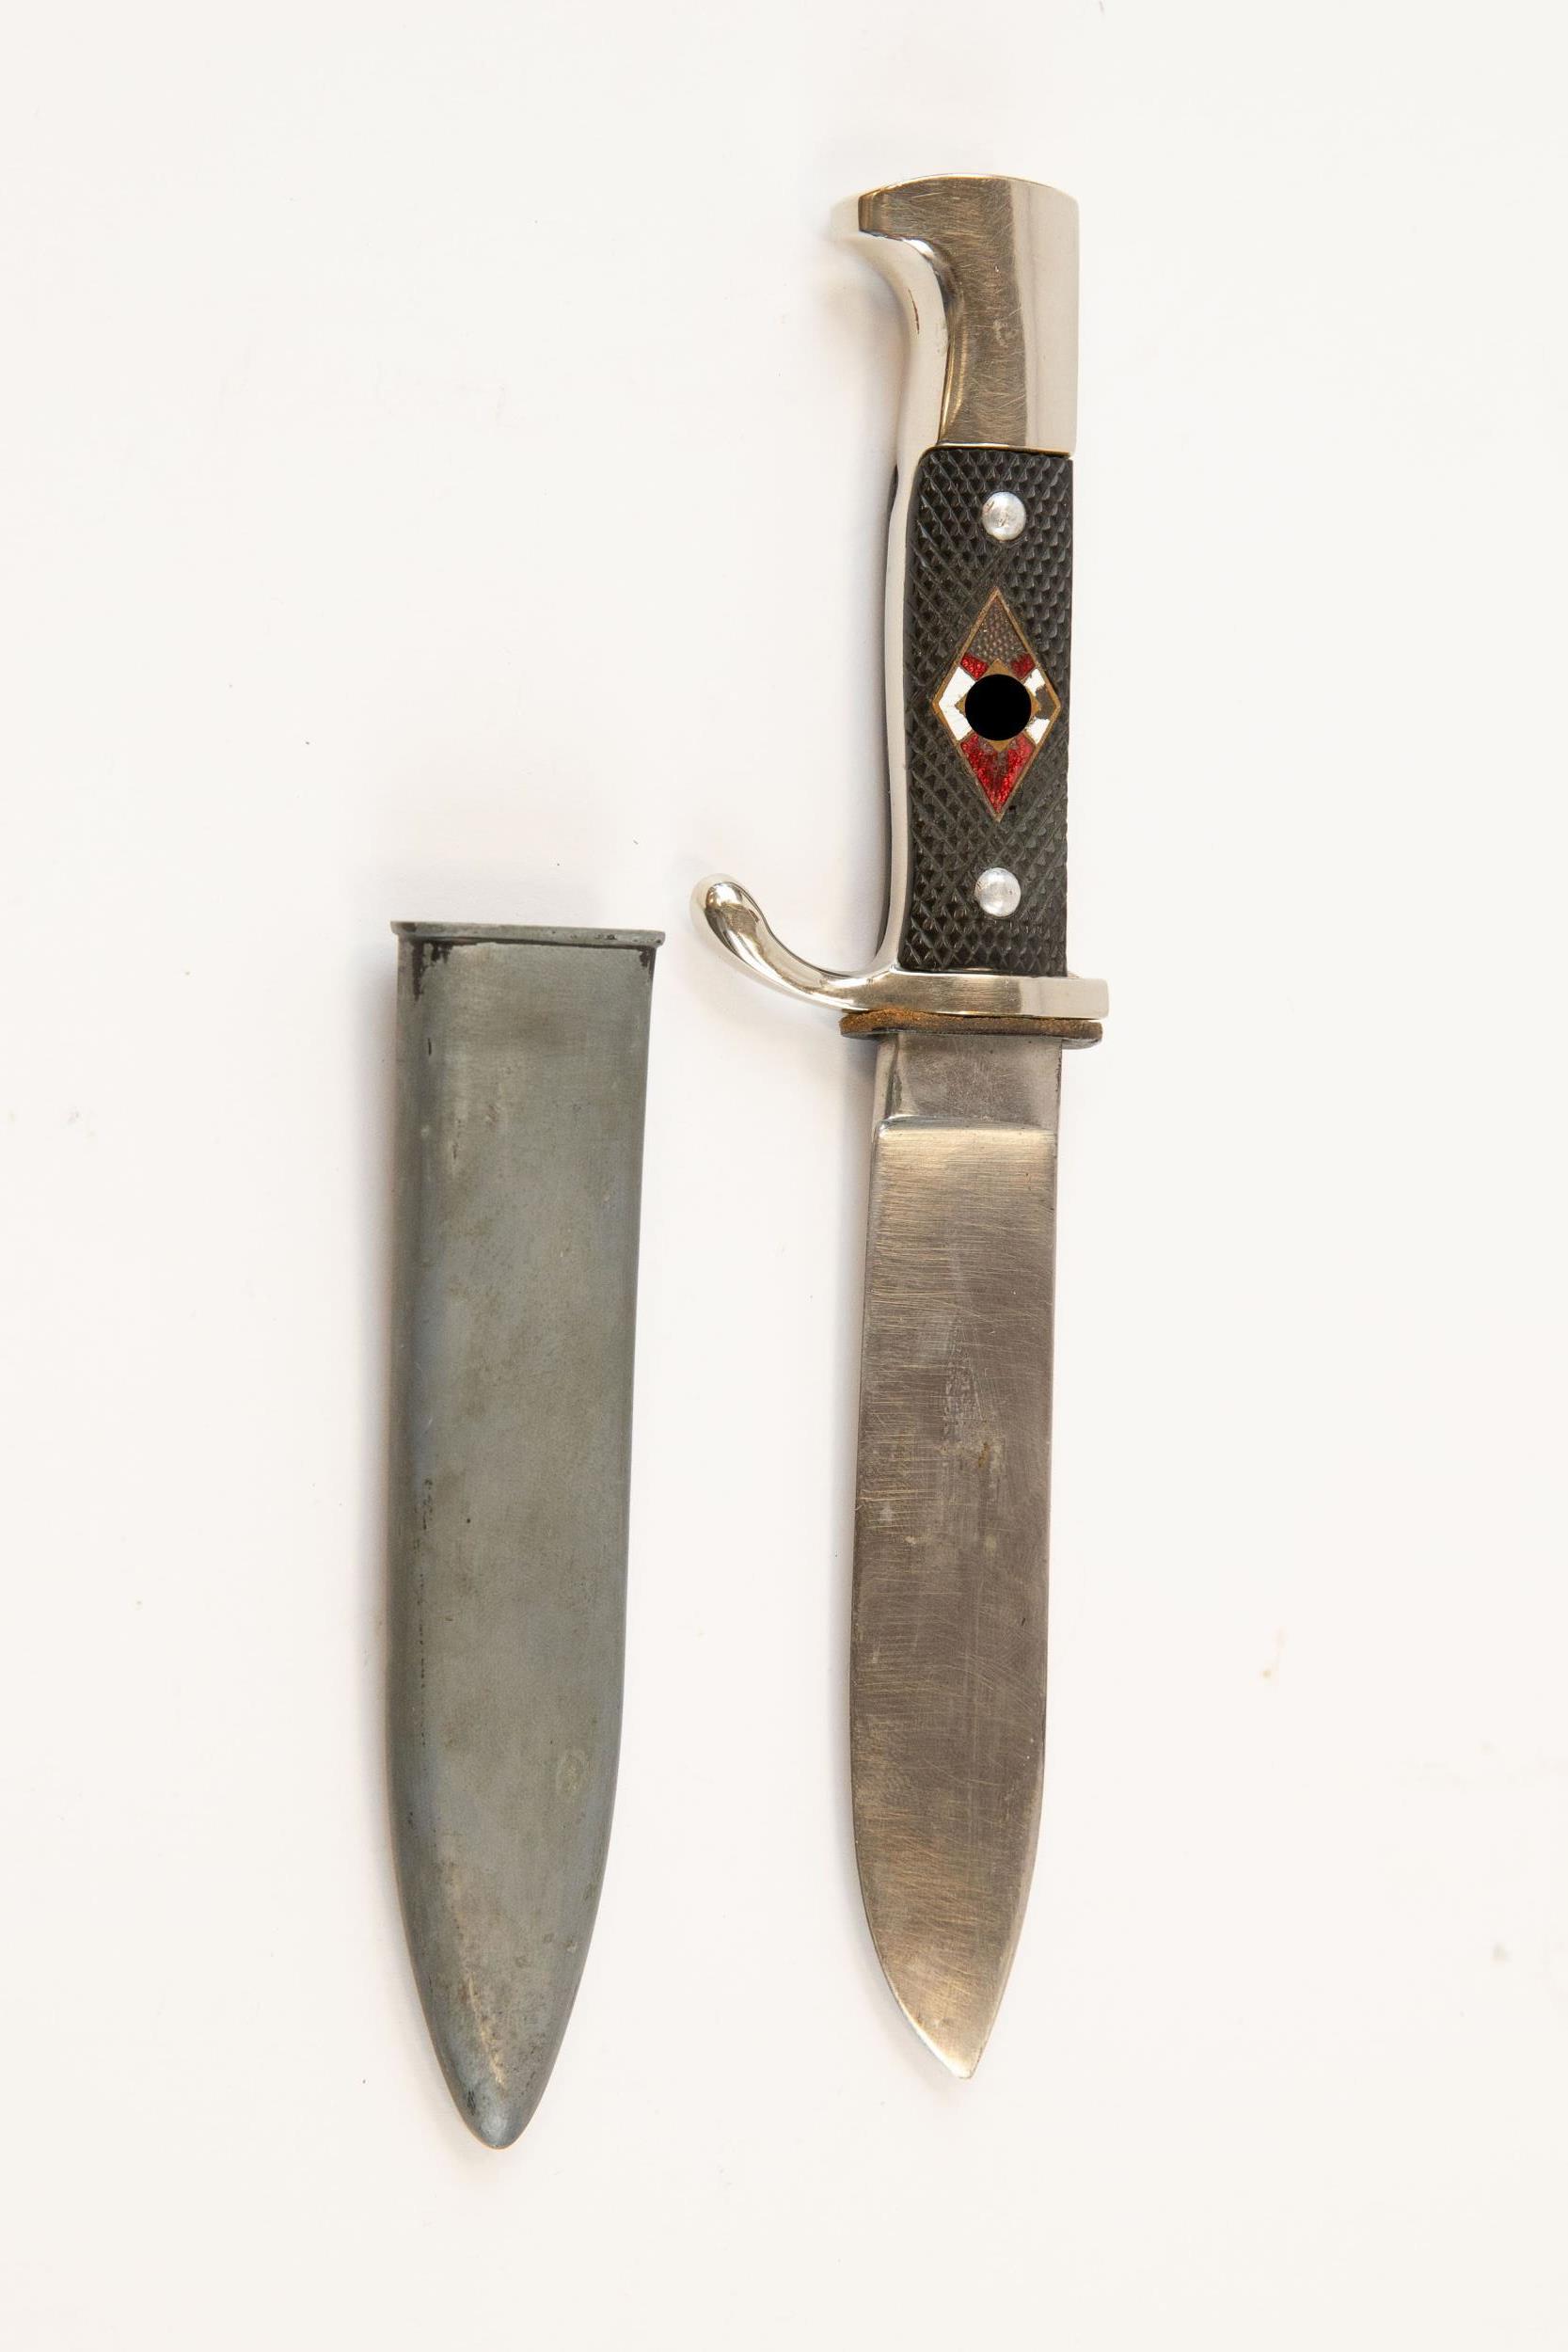 A small size German Youth knife, plain blade 4-3/8", bright plated hilt with chequered black grips